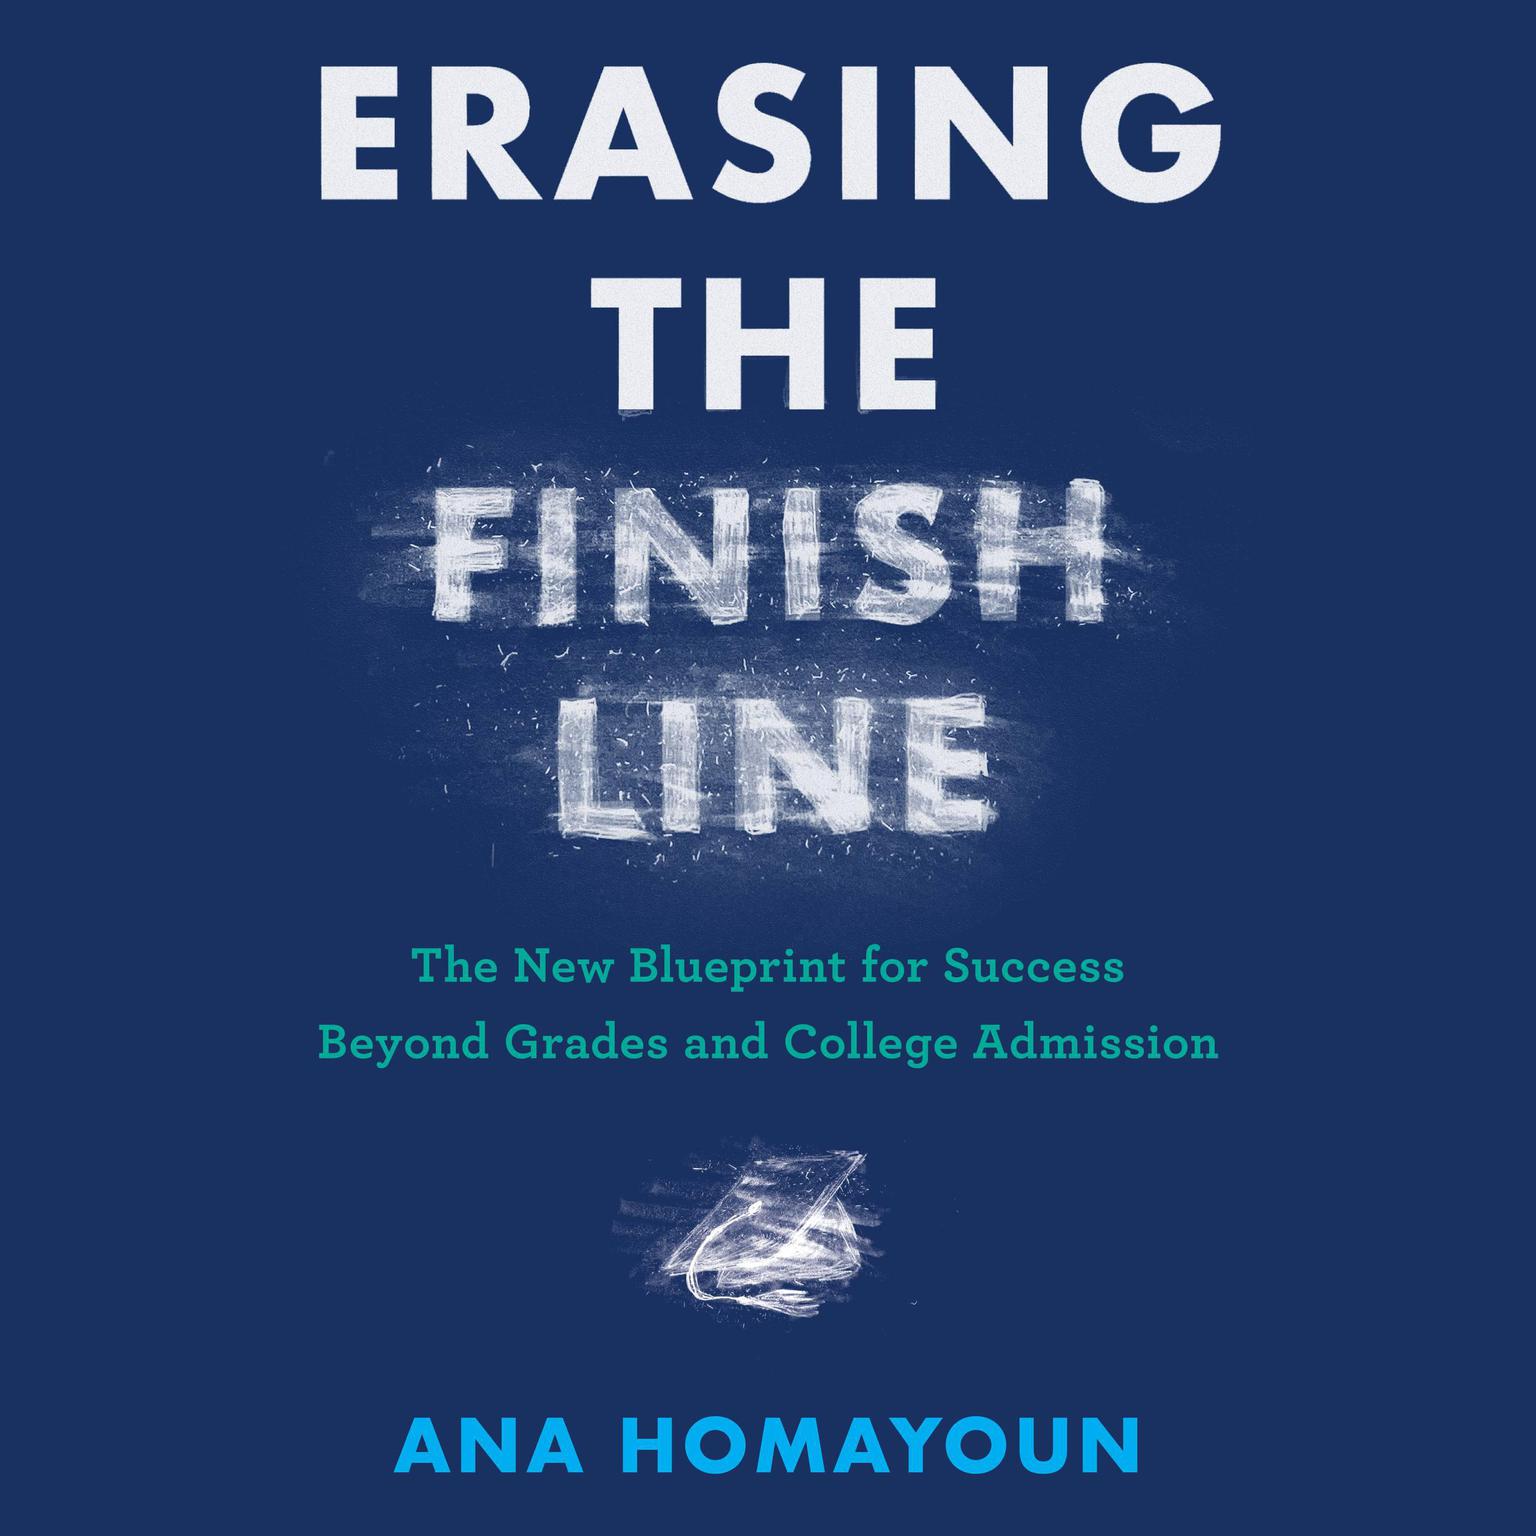 Erasing the Finish Line: The New Blueprint for Success Beyond Grades and College Admission Audiobook, by Ana Homayoun